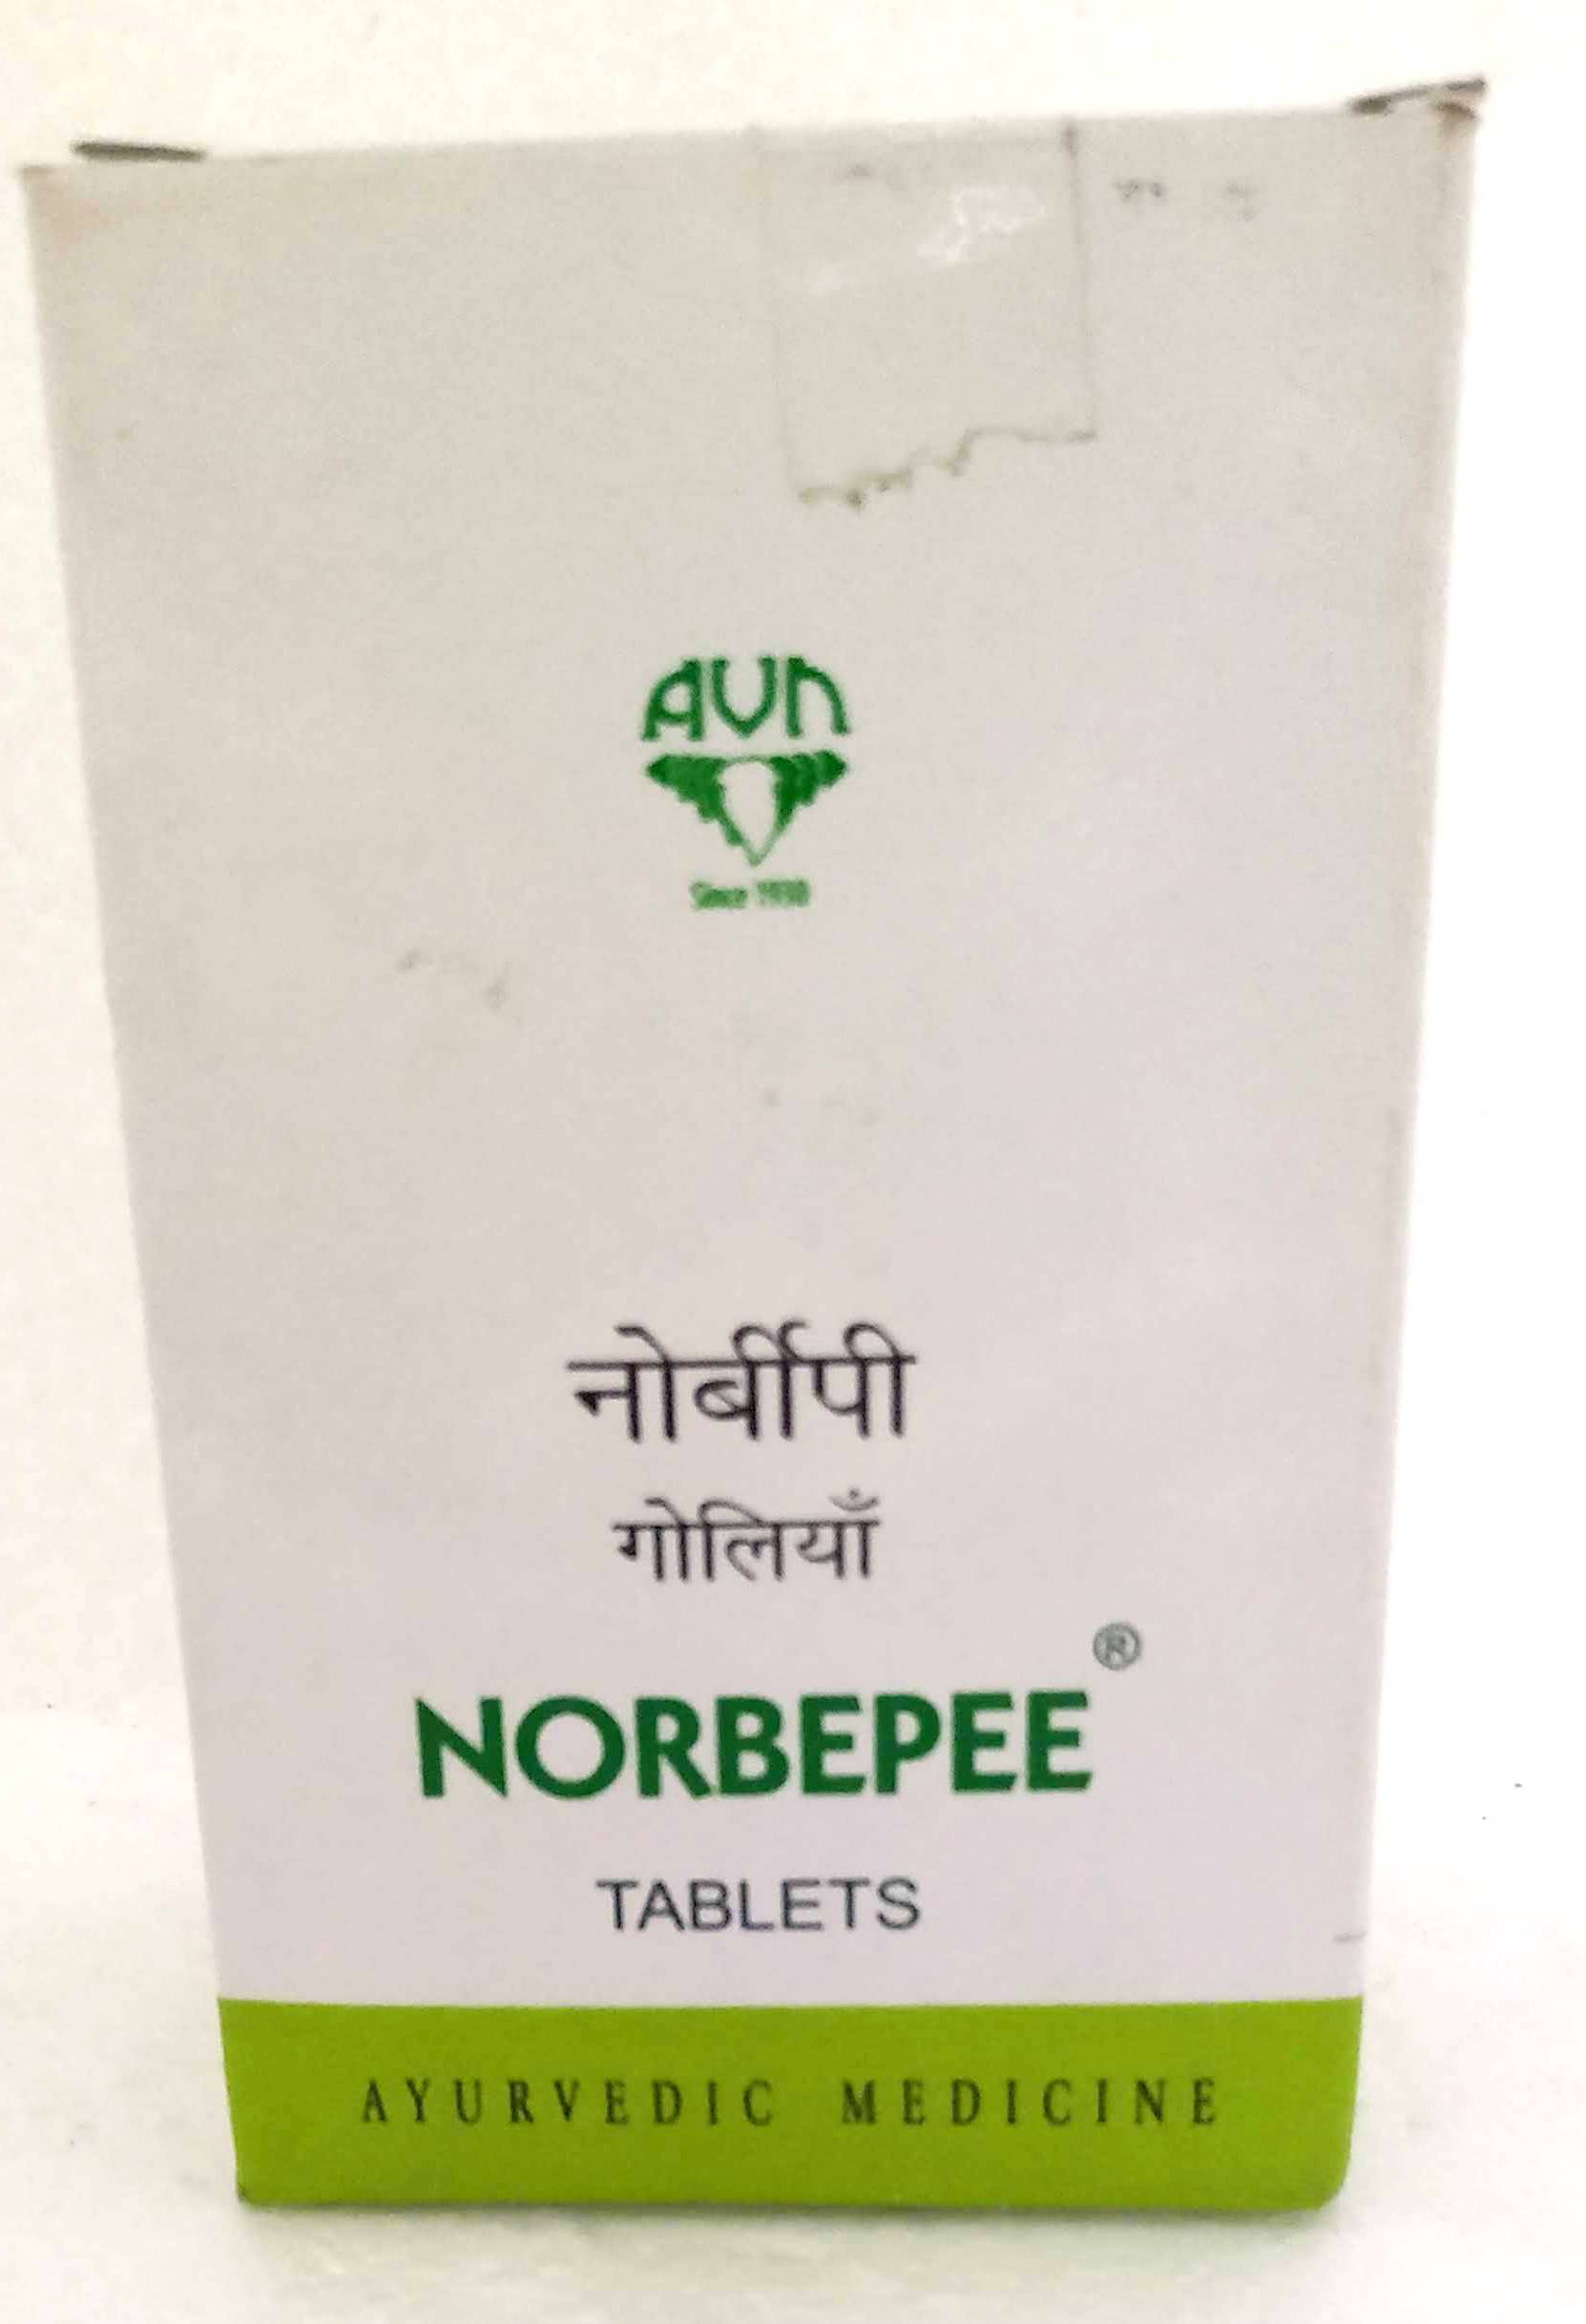 Shop AVN Norbeepee 15Tablets at price 48.00 from AVN Online - Ayush Care